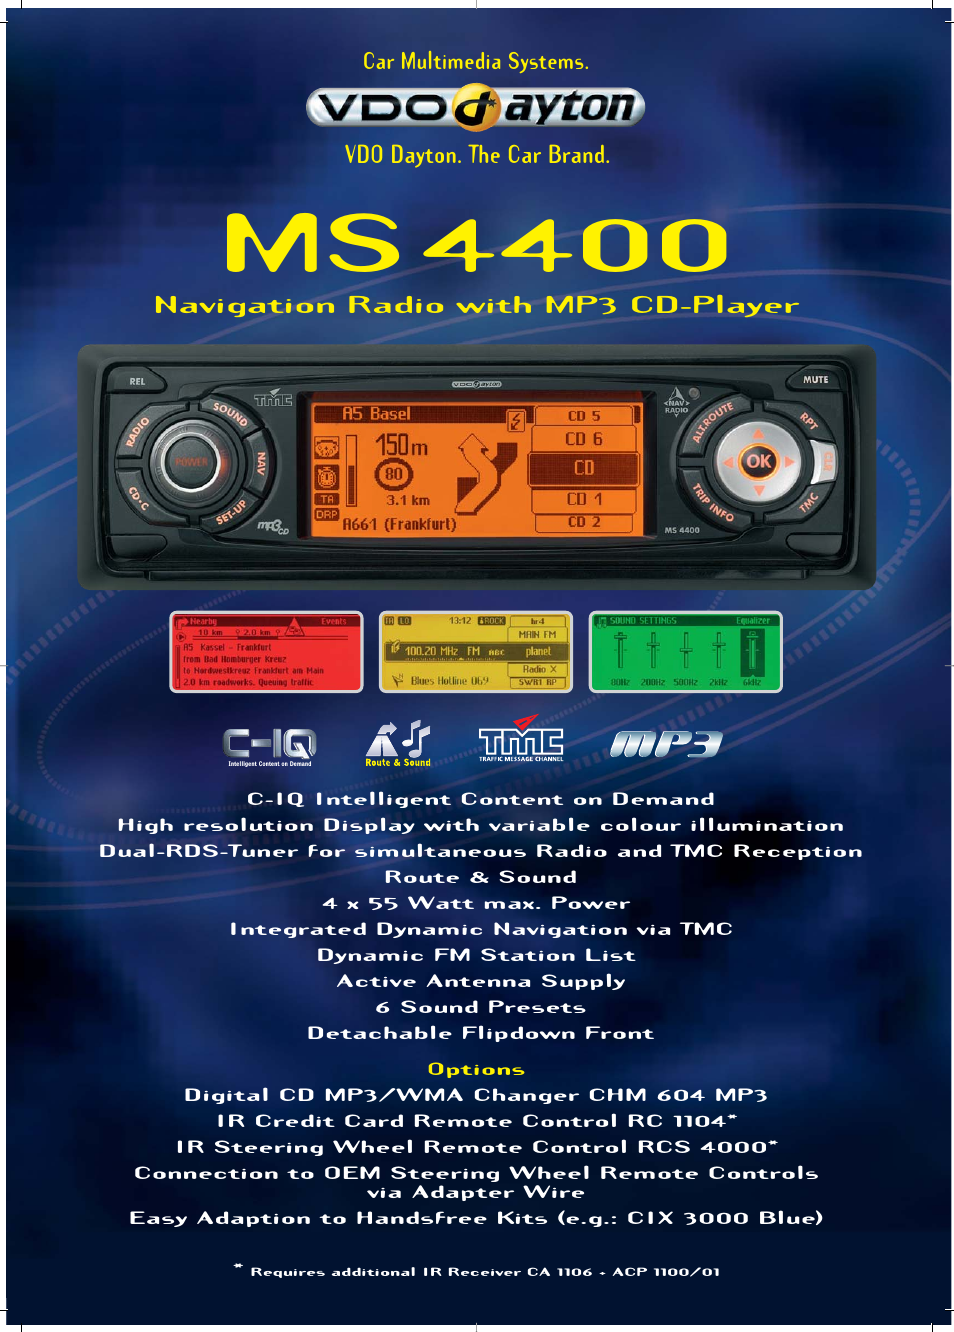 Car Multimedia Systems MS4400